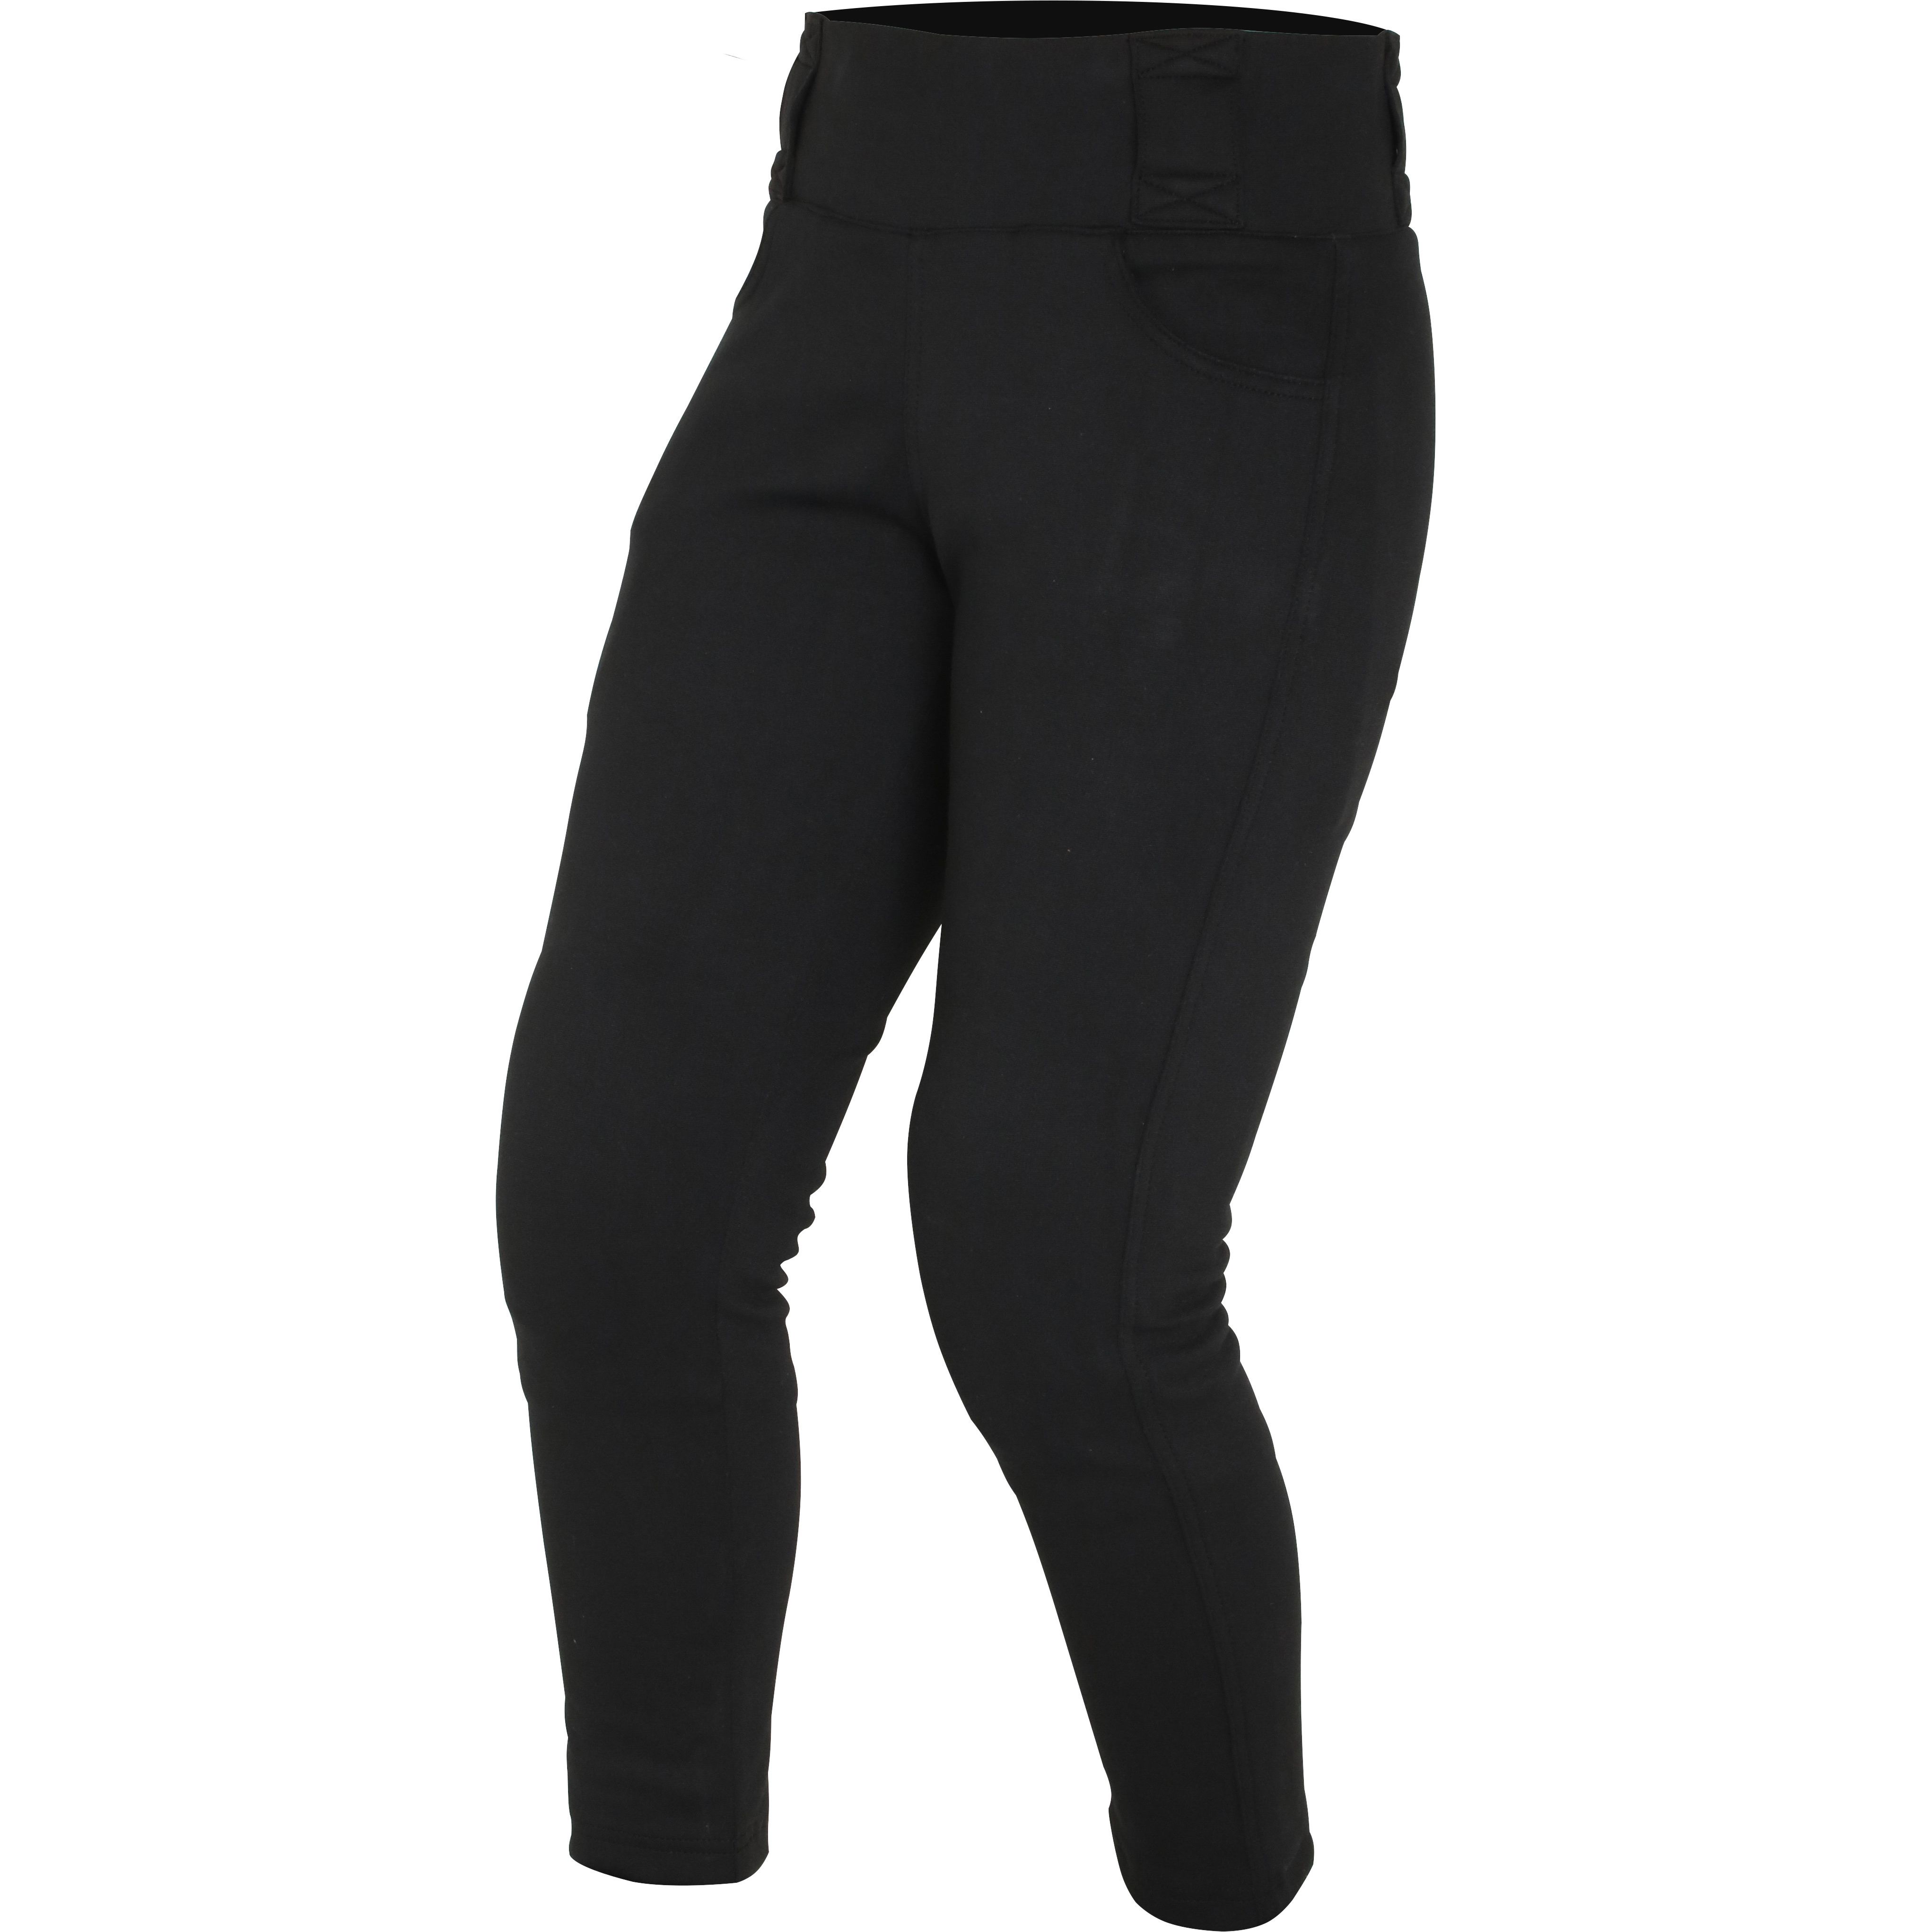 Weise Pulse Motorcycle Leggings | FREE UK DELIVERY